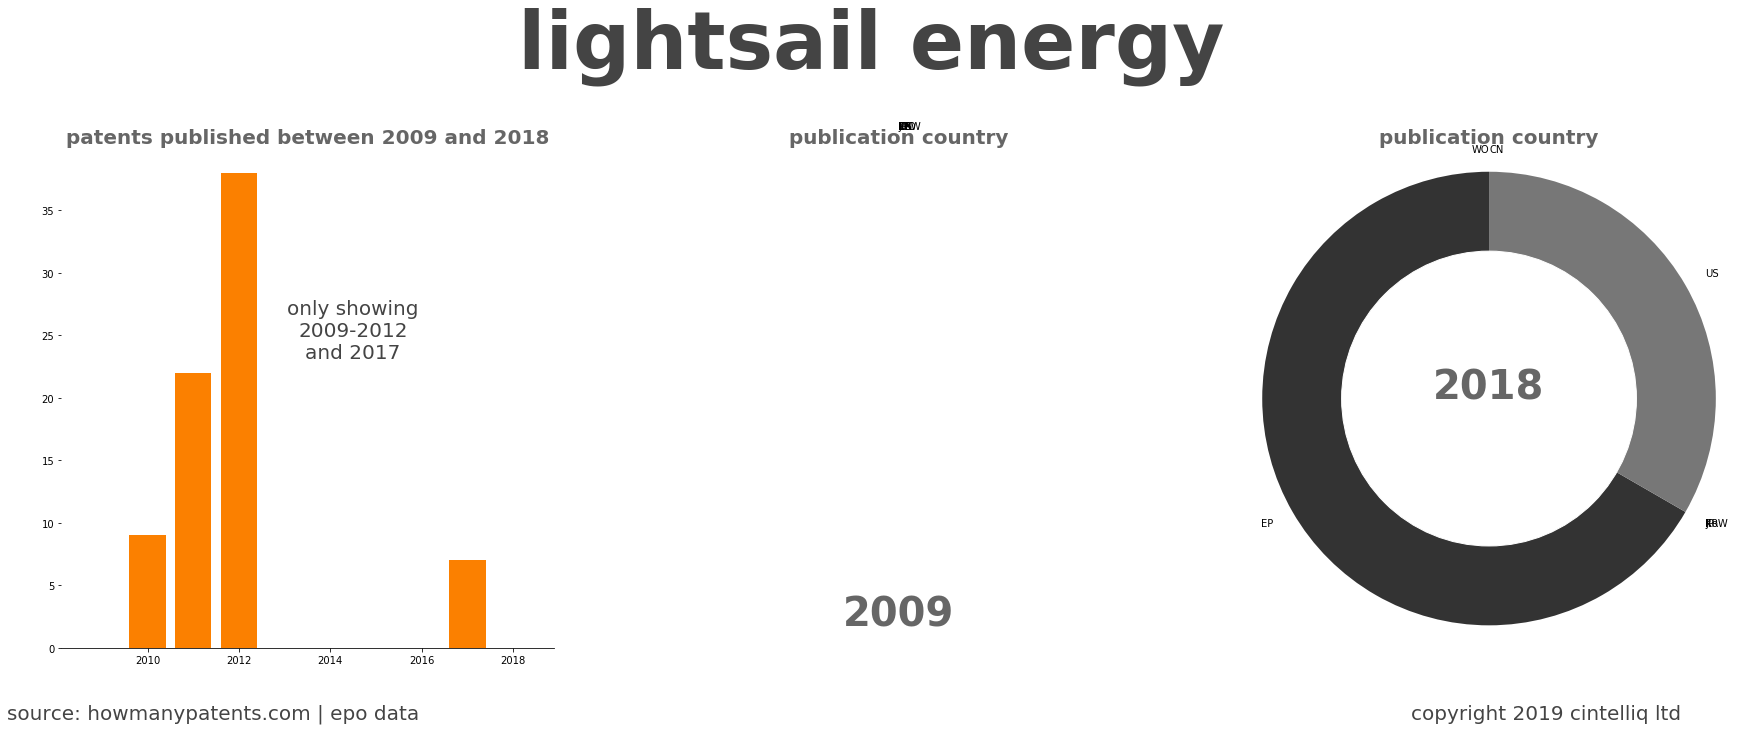 summary of patents for Lightsail Energy